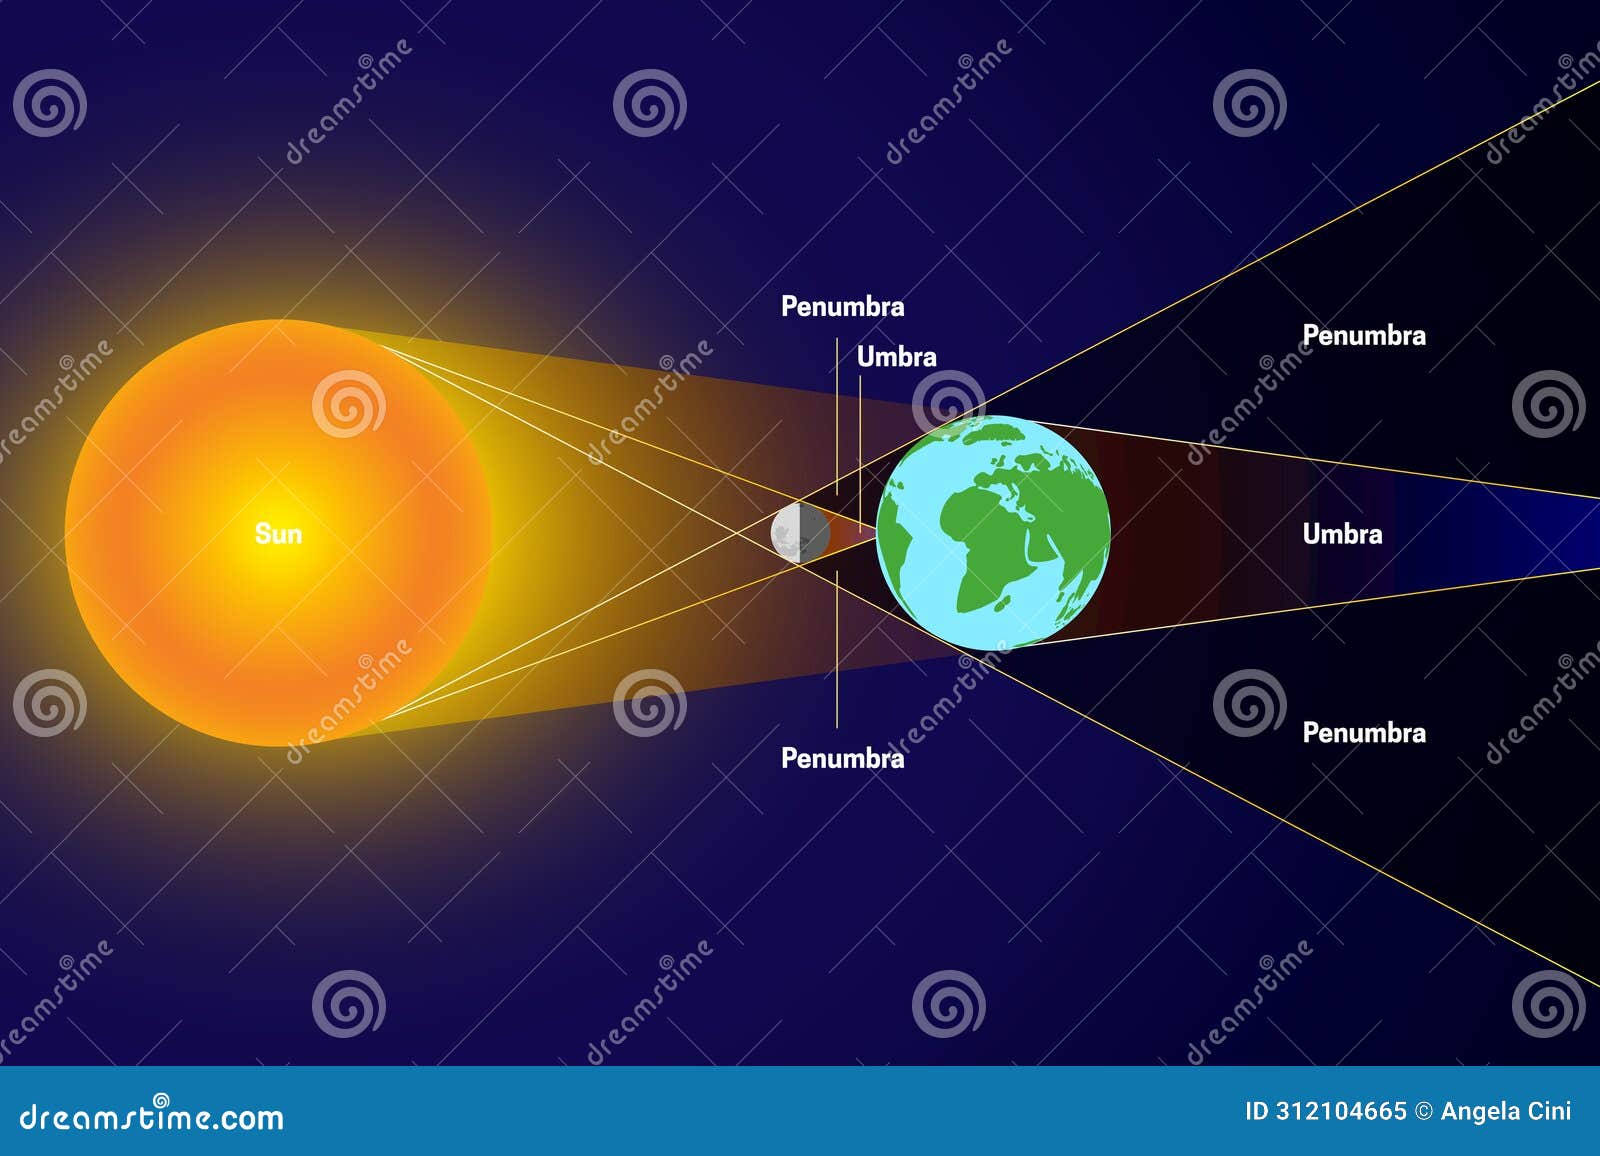 solar eclipse with penumbra and umbra. sun, moon, earth 